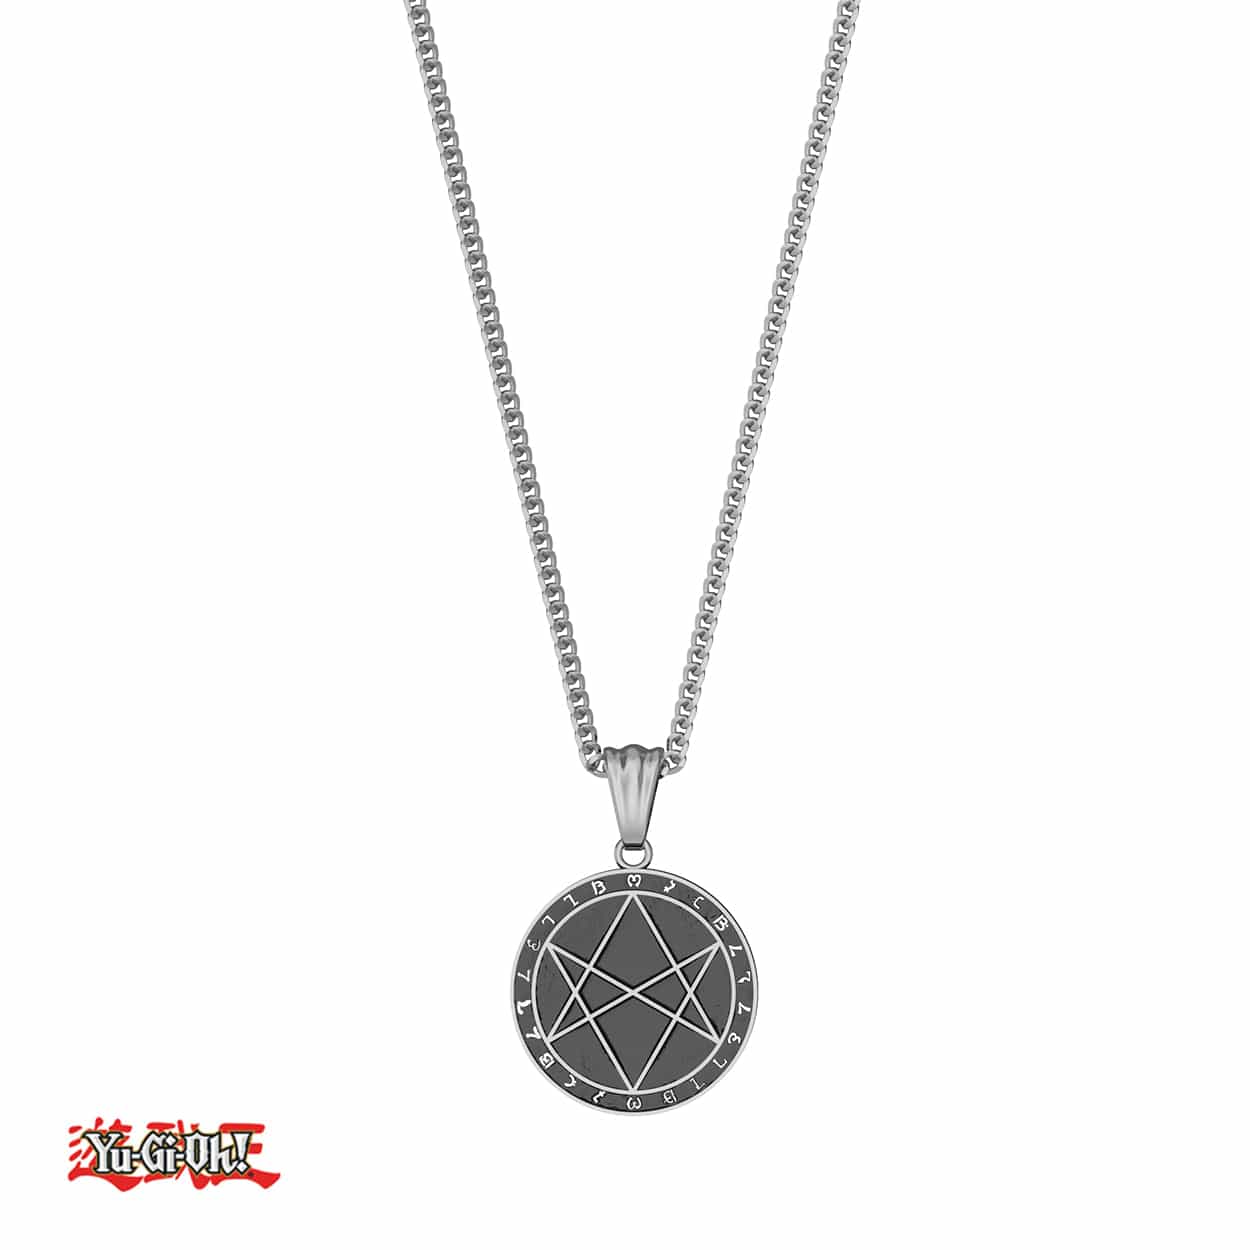 Yu-Gi-Oh!™ Seal Of Orichalcos Necklace